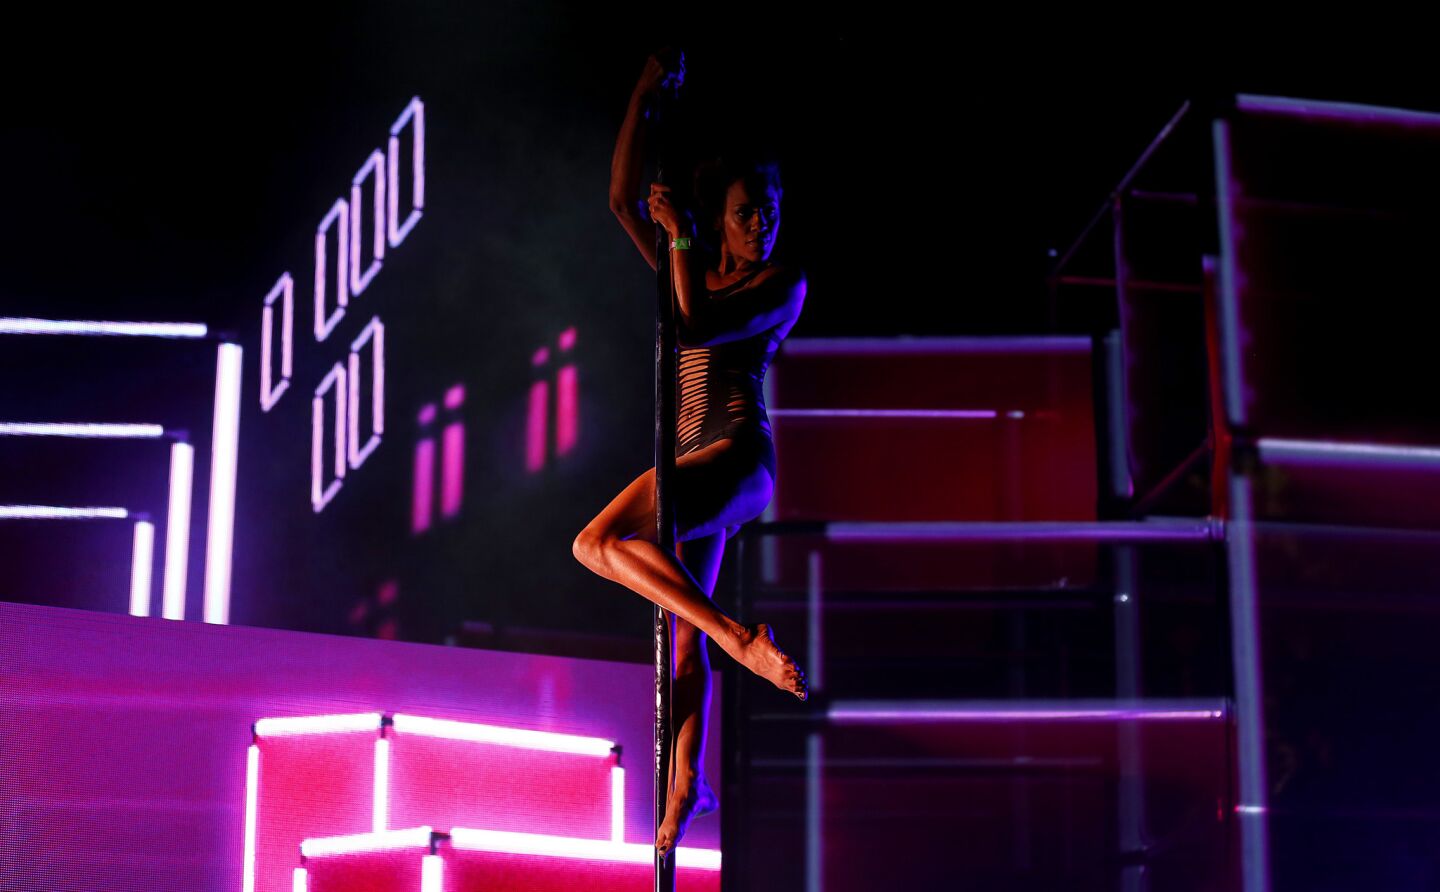 A dancer performs with electropop singer Halsey.